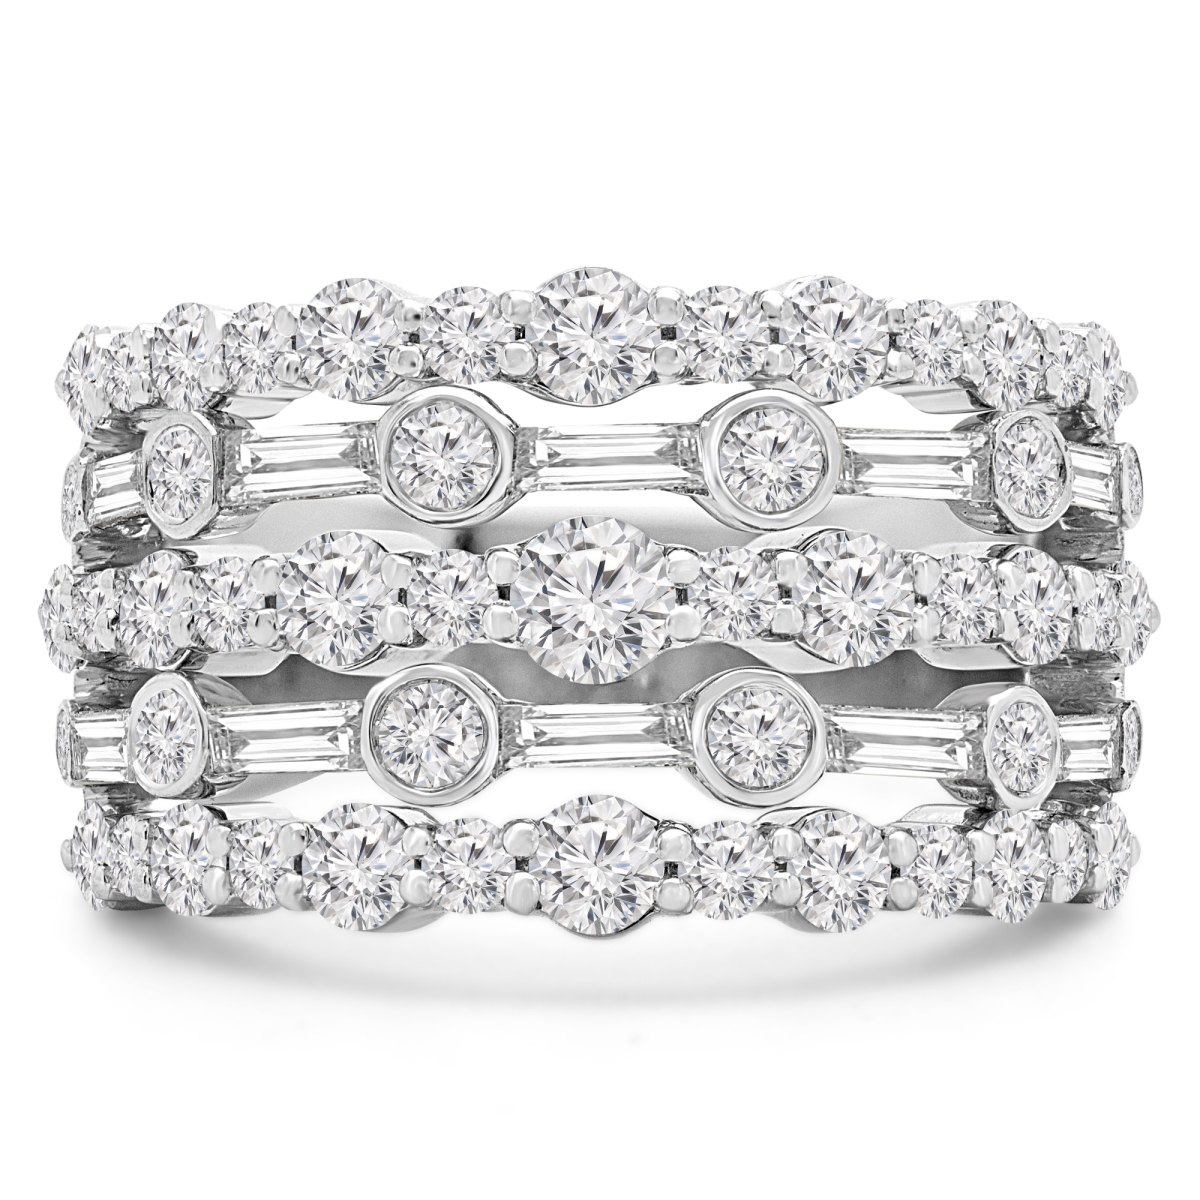 Picture of Majesty Diamonds MD190286-P 2.125 CTW Round Diamond Vintage Five-Row Cocktail Ring in 18K White Gold